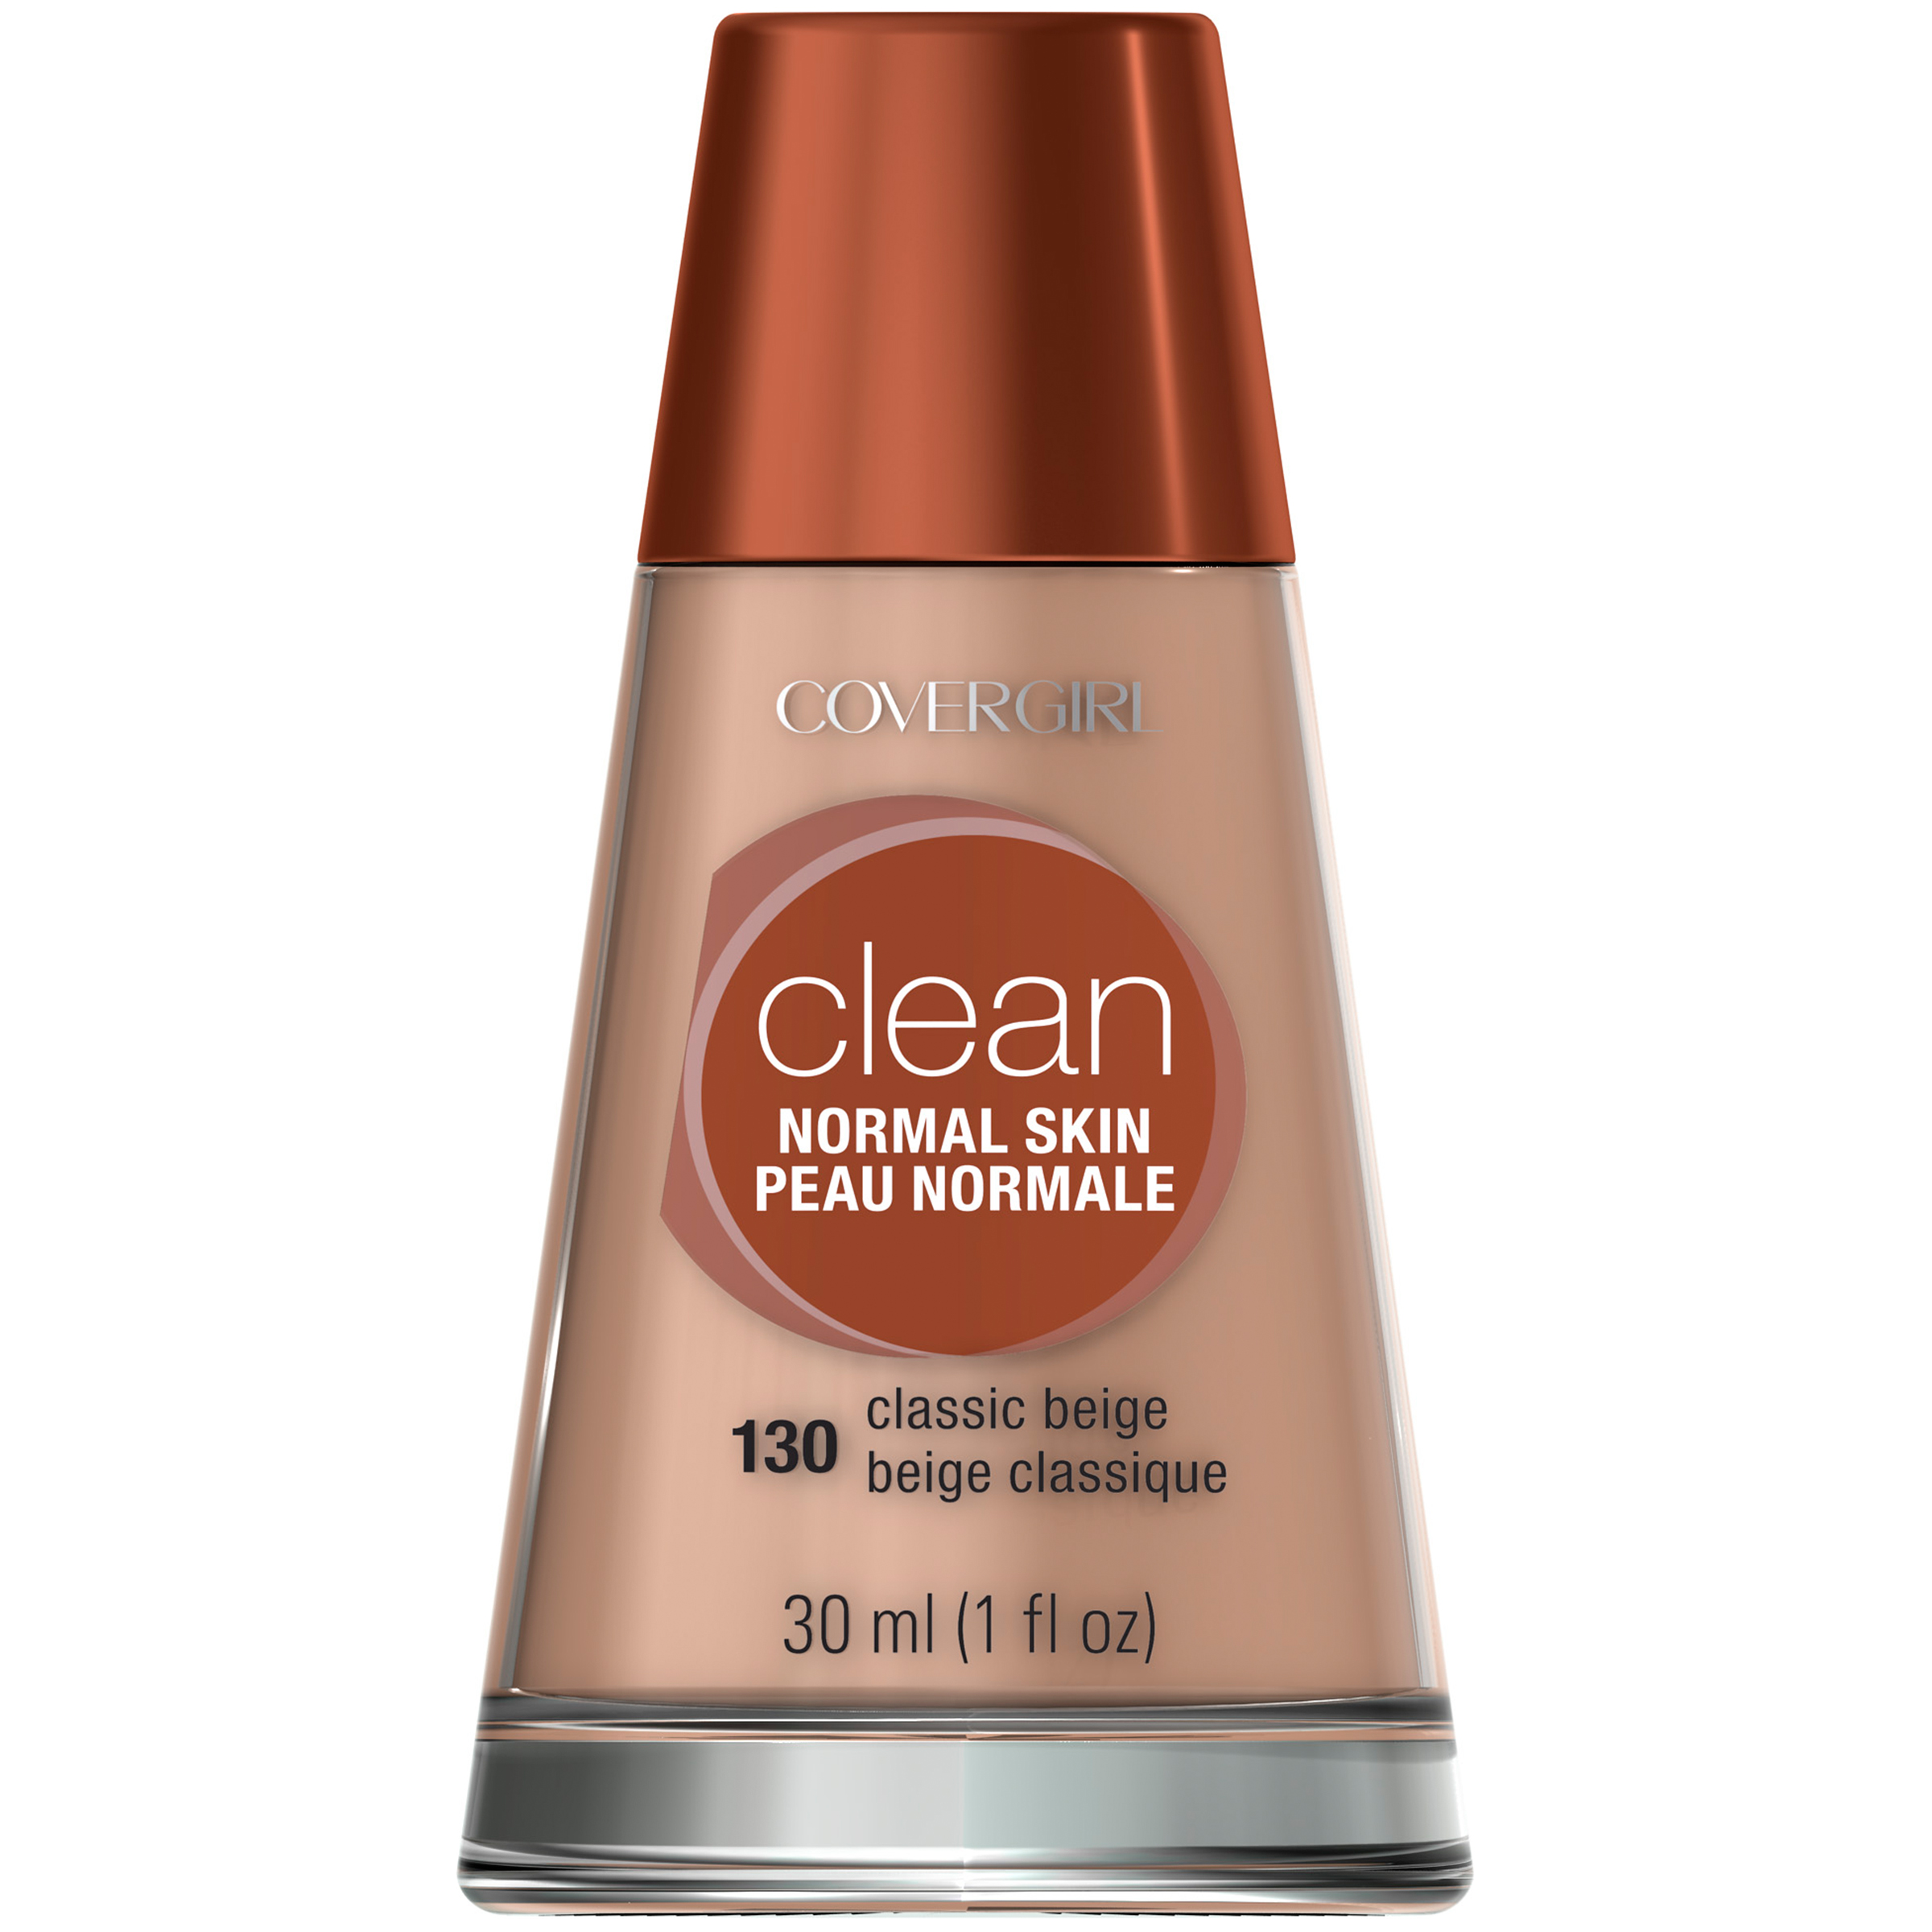 CoverGirl's Clean Liquid Makeup for Normal Skin